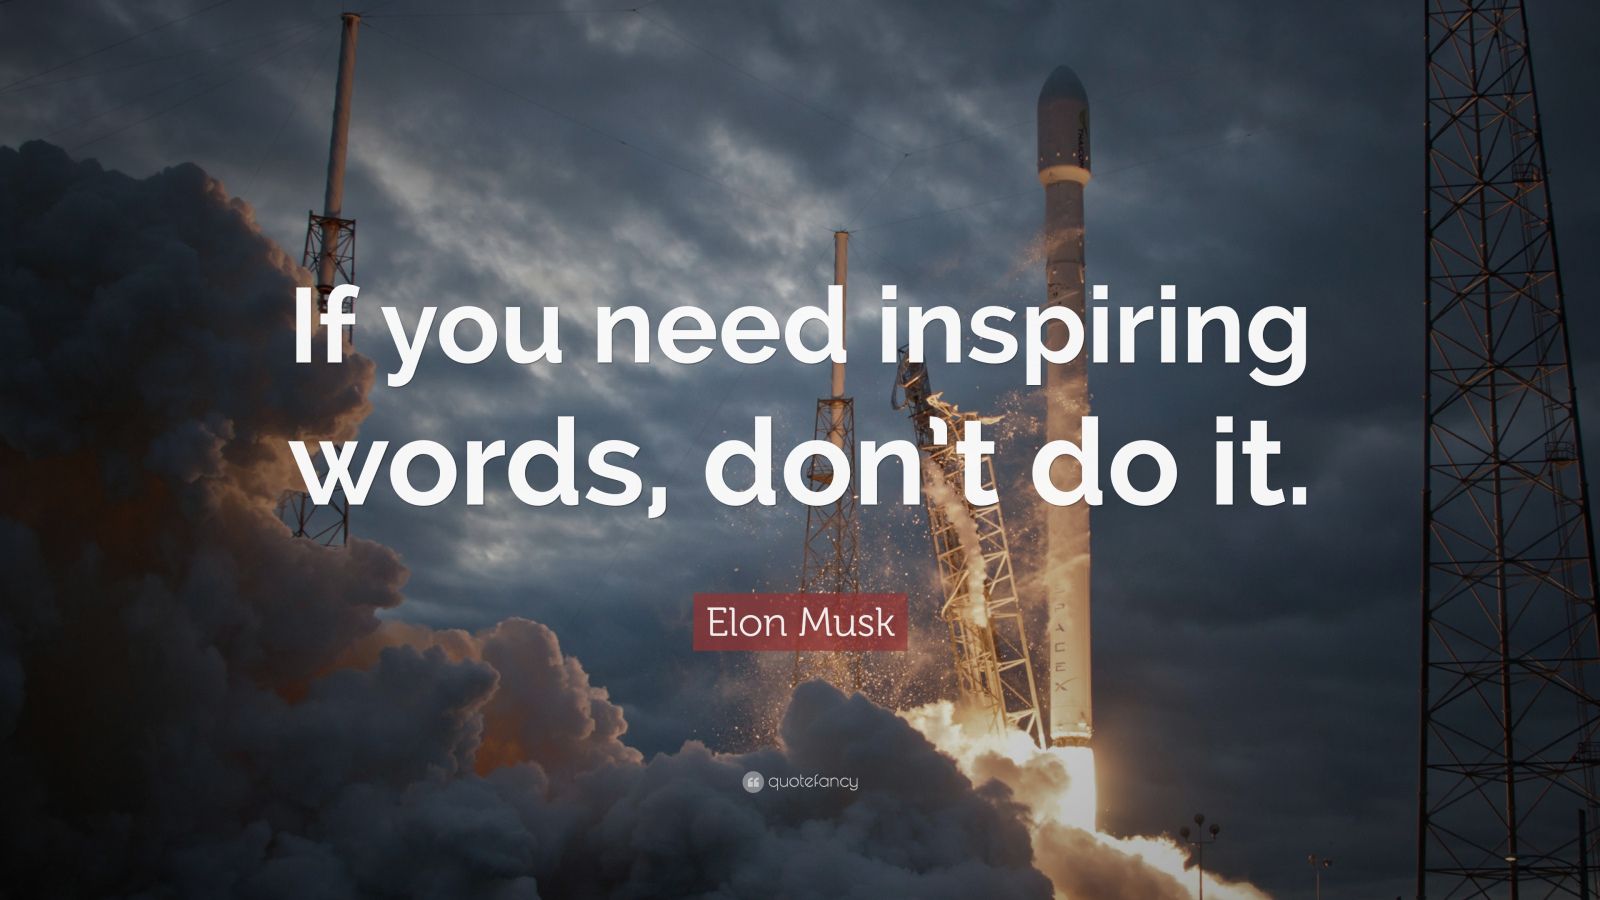 Elon Musk Quote: “If you need inspiring words, don’t do it.”